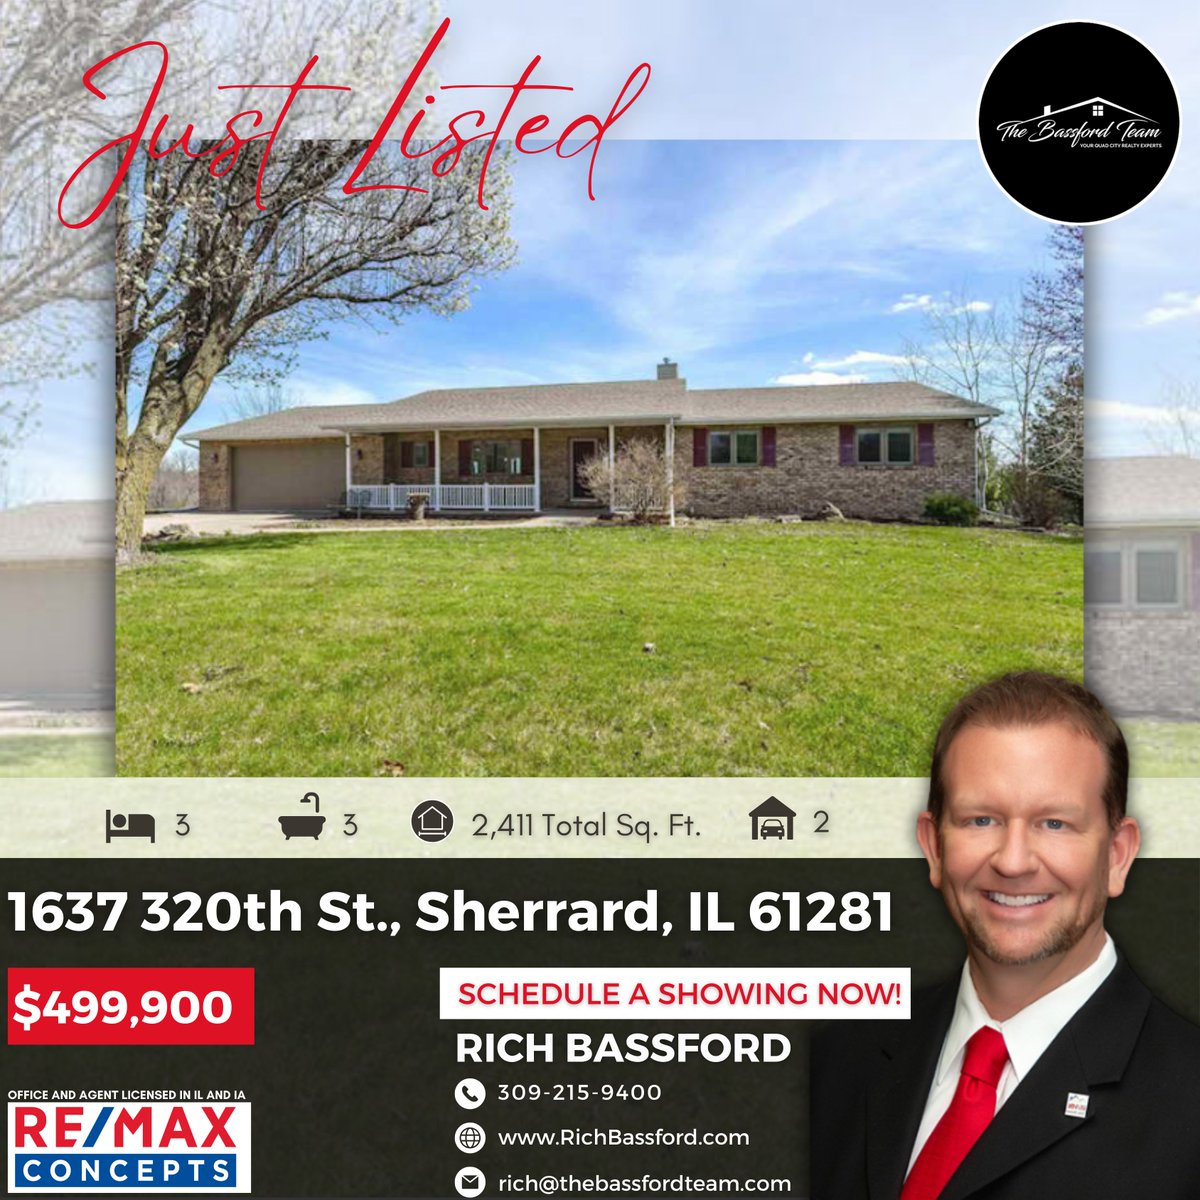 🌿 Dream Home Alert! 🏡 Immerse yourself in the charm of this 3-bed, 3-bath brick ranch nestled on 15 lush acres in Sherrard.
.
🔗👉🏻👉🏻👉🏻 richbassford.com/property-searc…
.
#quadcitiesillinois #visitquadcities #quadcitiesrealtor #quadcitiesrealestate #quadcitieshomesforsale #qcproperties